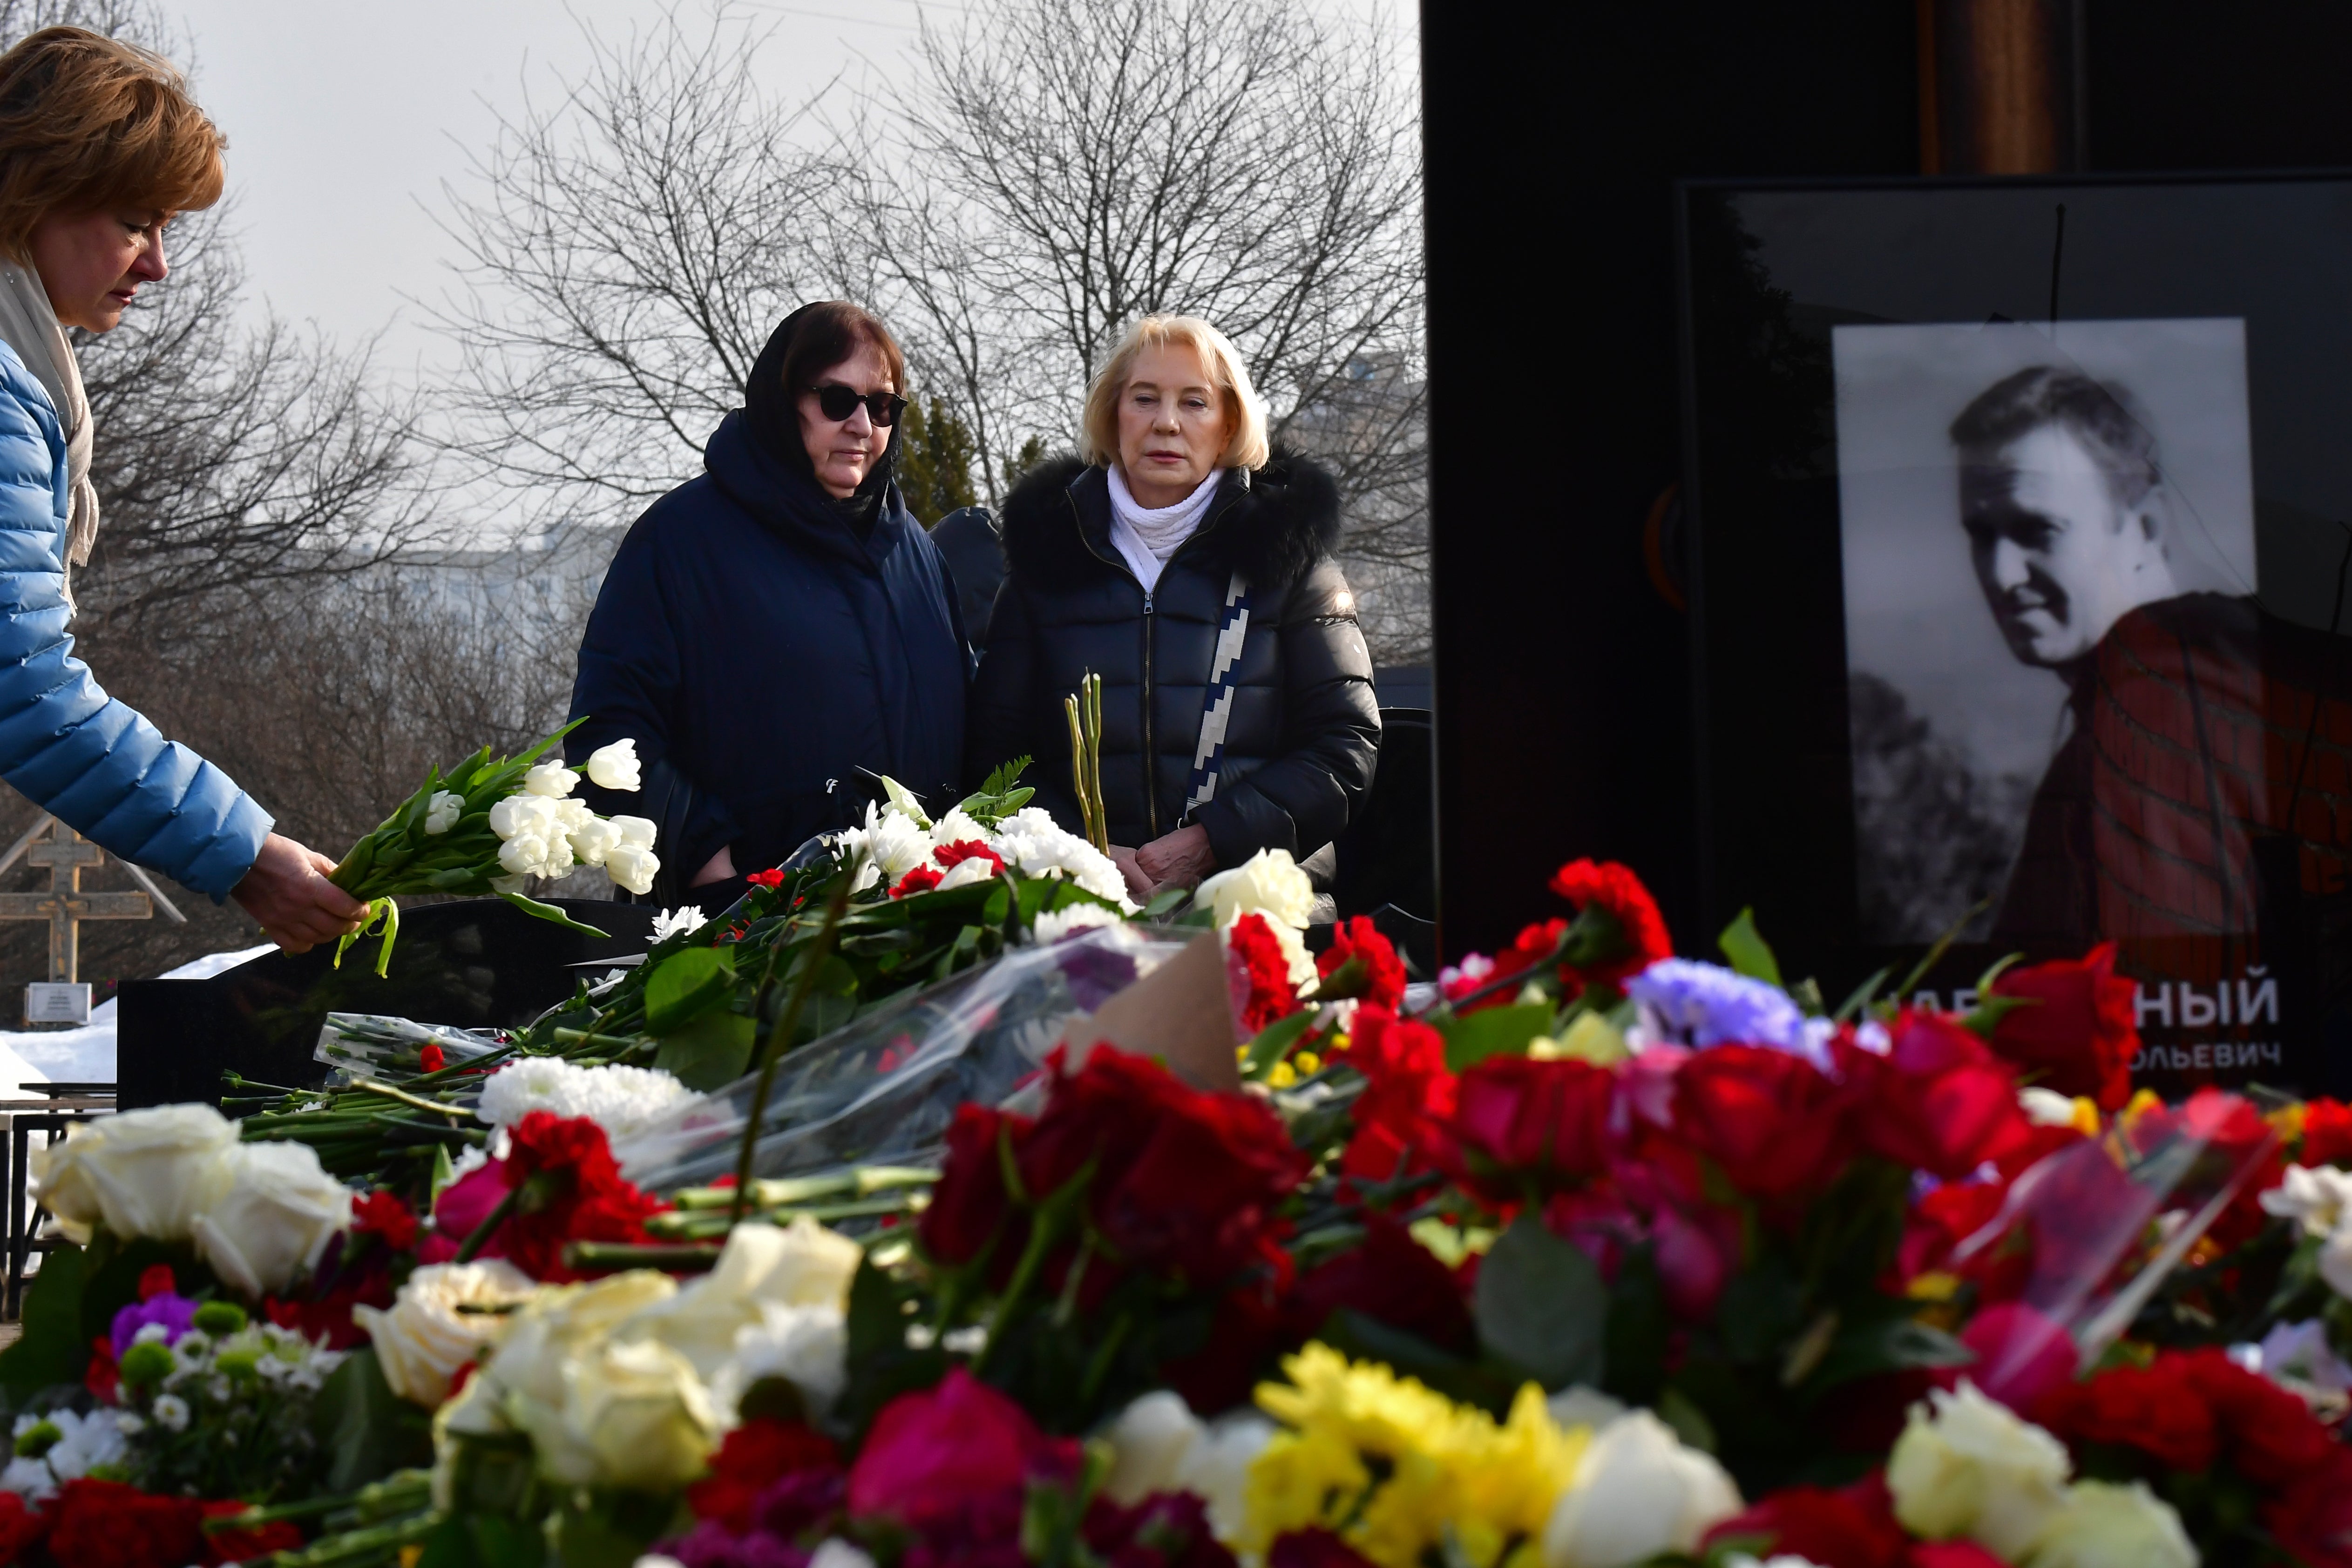 Russian opposition leader Alexei Navalny's mother, Lyudmila Navalnaya, left, and his mother-in-law, no name available, visit the grave of Alexei Navalny after his yesterday